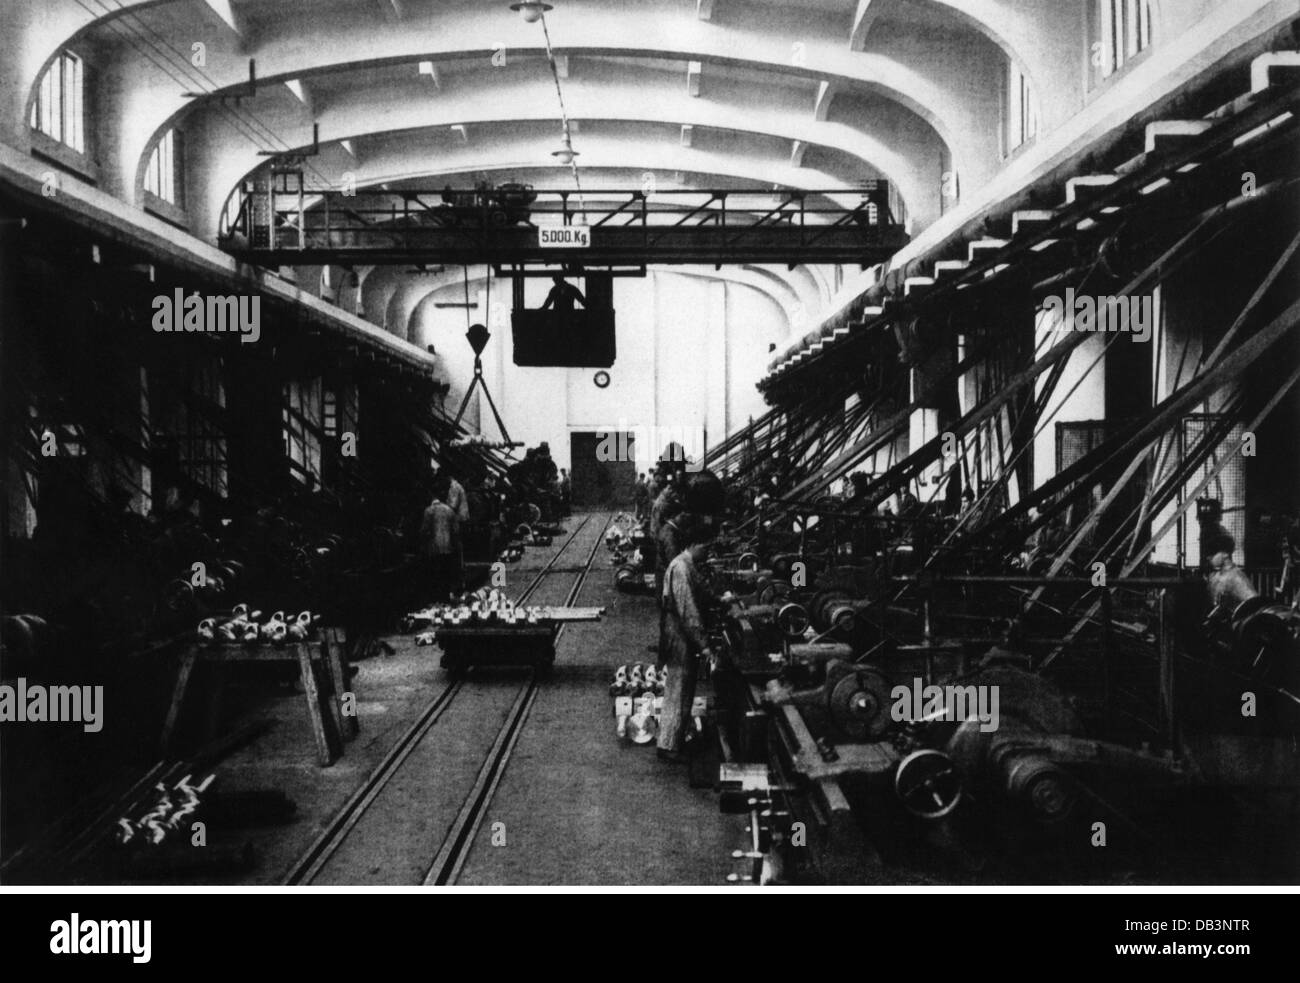 industry, plant, production hall for crank shafts, circa 1900, Additional-Rights-Clearences-Not Available Stock Photo